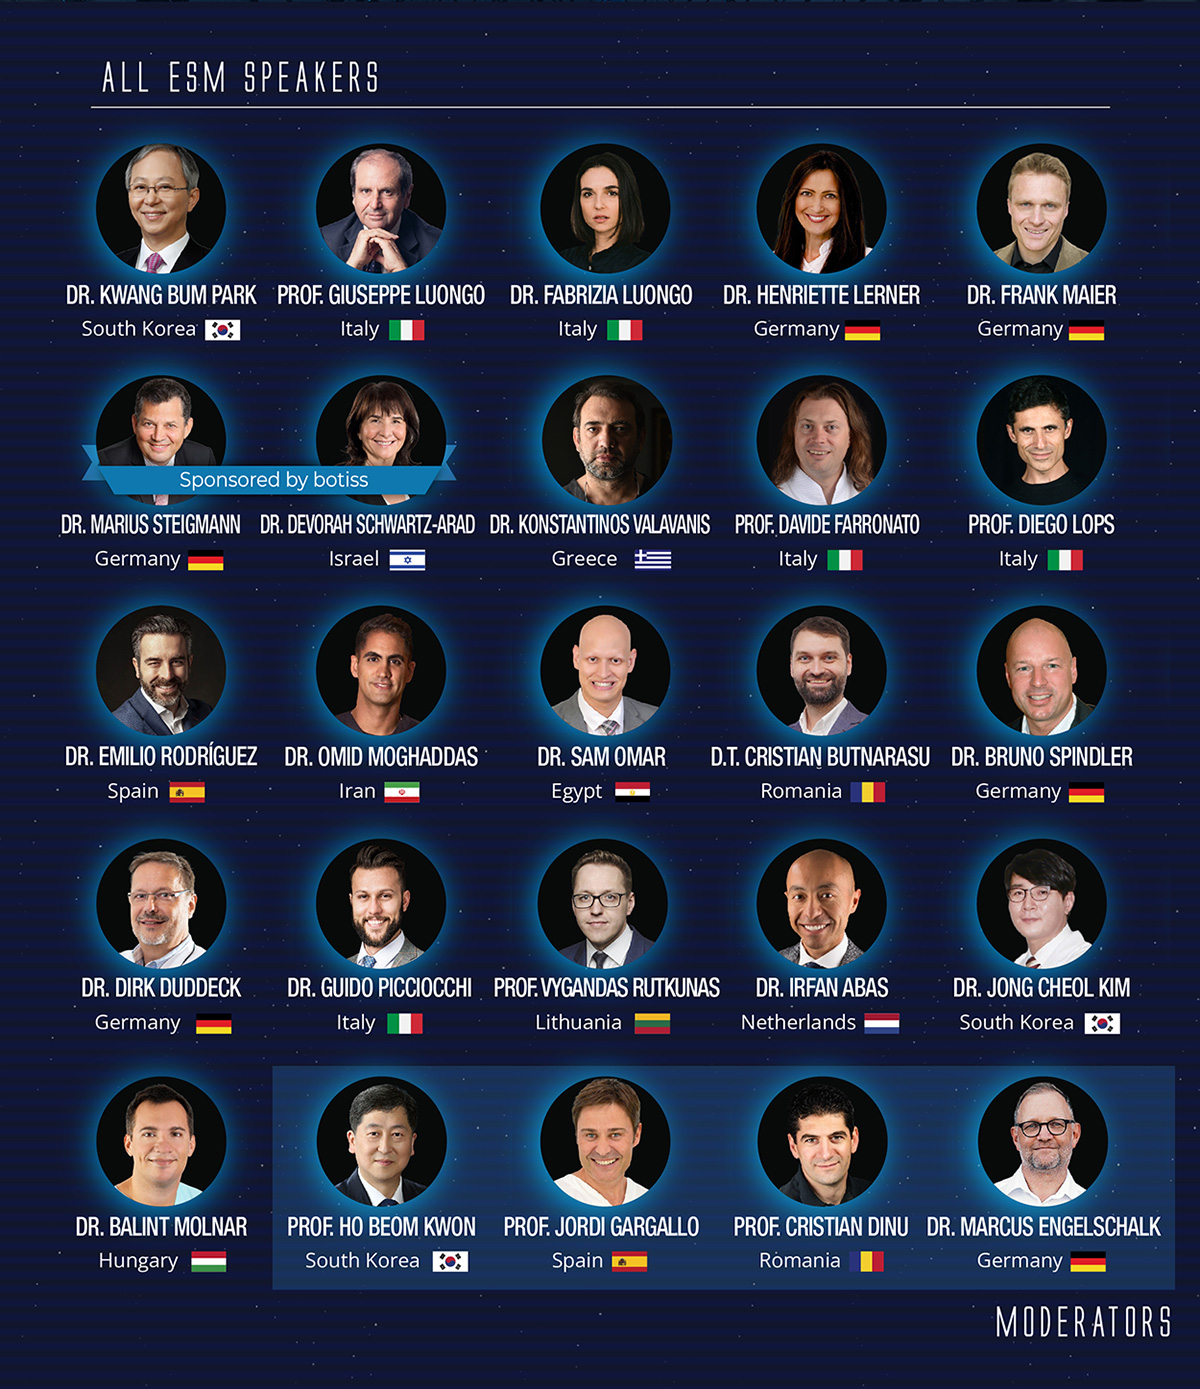 You will meet the world-class recognized speakers; 4 moderators, 16 main lecturers, and 10 workshop speakers. they will cover a diversity of subjects that includes restorative dentistry, digital implantology, soft tissue management, surgical treatment, and prosthetic dentistry. World TOP speakers will head to Romania!